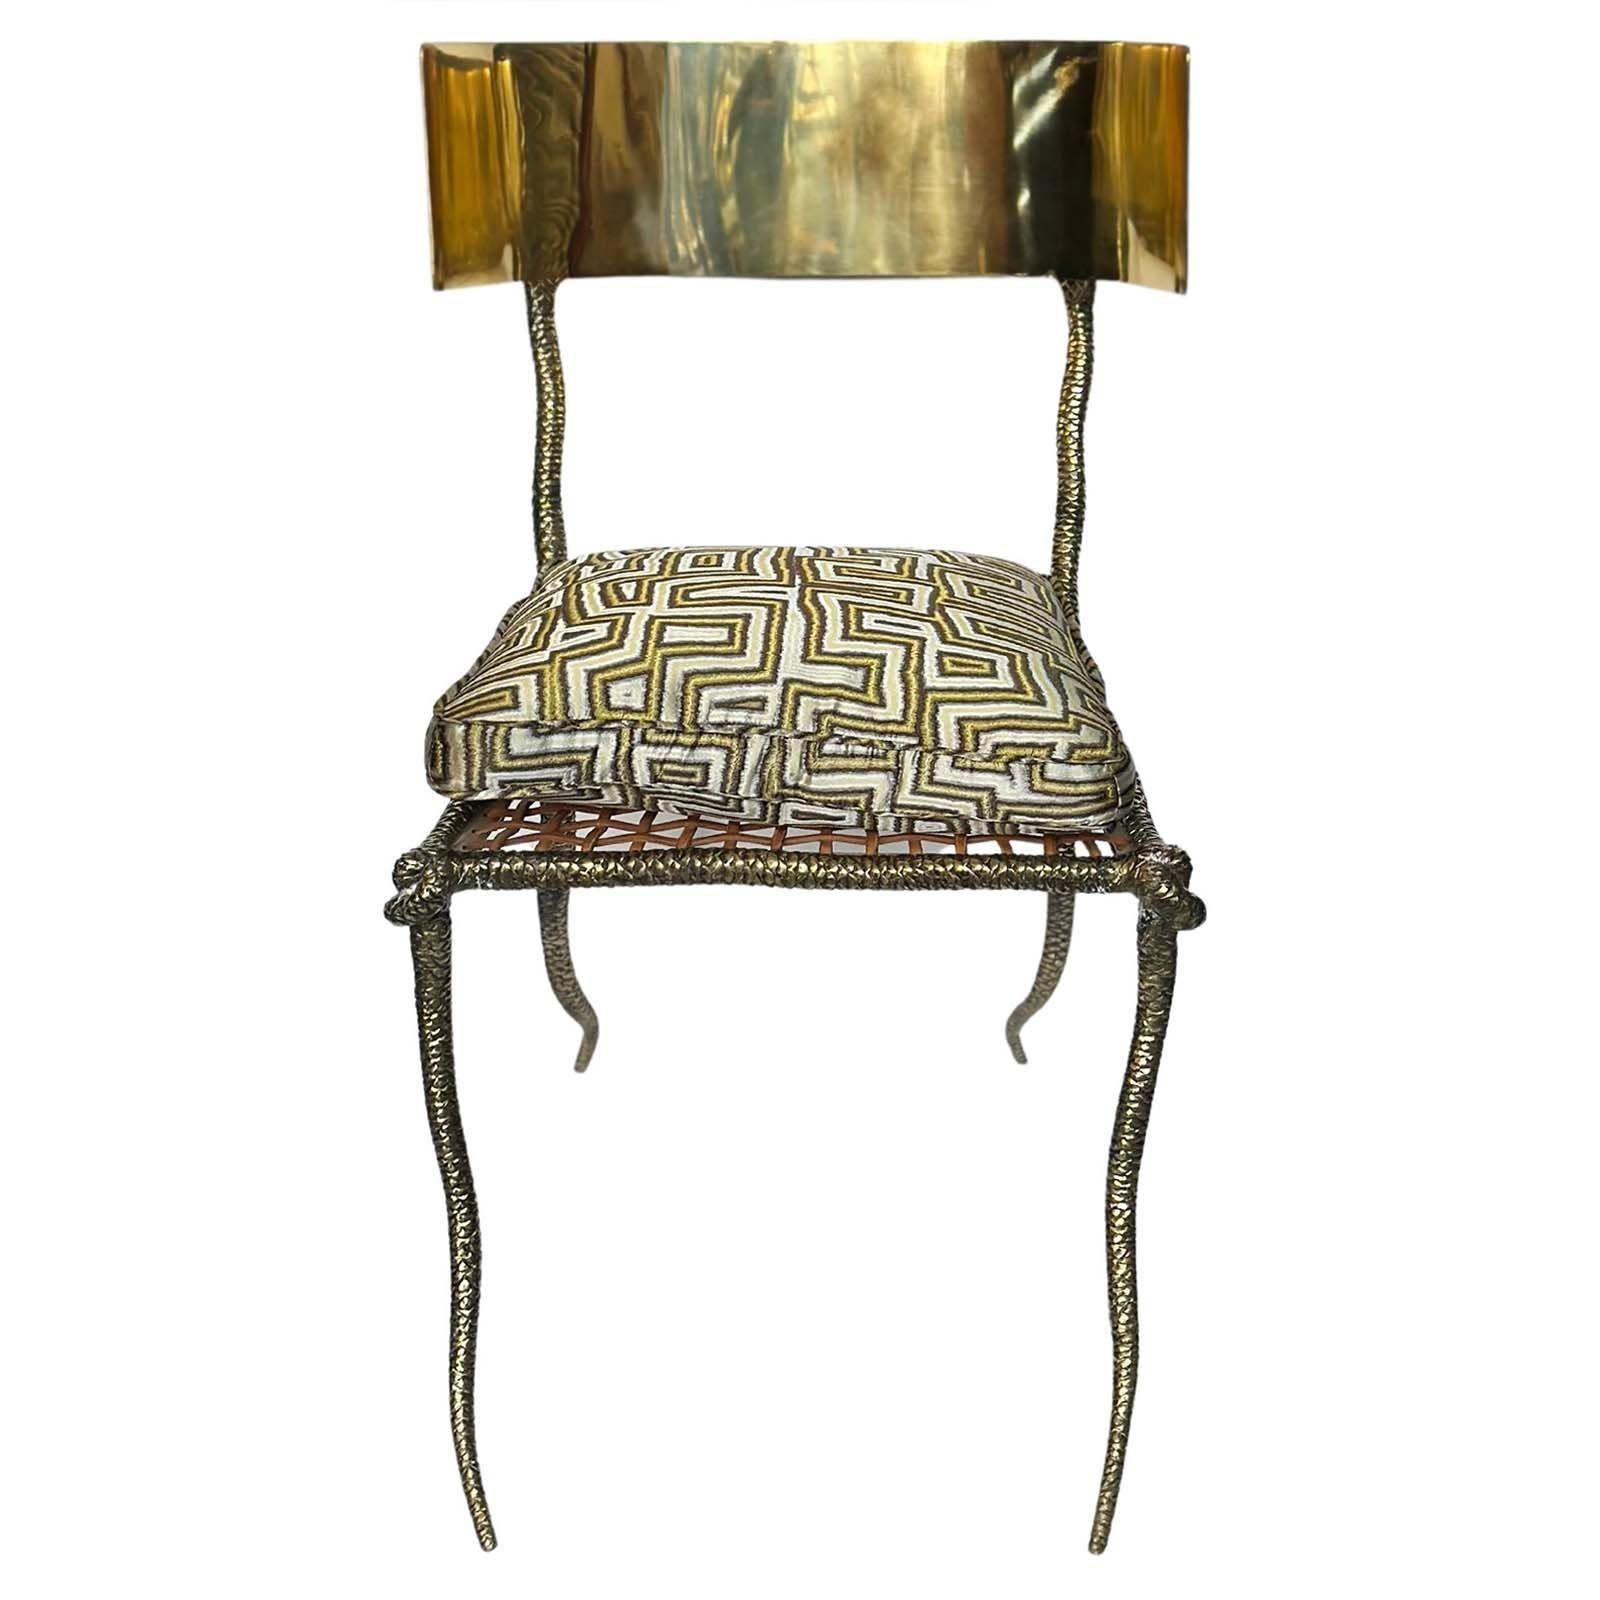 Pair of modern polished brass Klismos chairs with curved back, woven leather strapping and snake design on the brass work. Made in USA, 21st Century.
Each chair includes a removable cushion.
Dimensions:
35.5